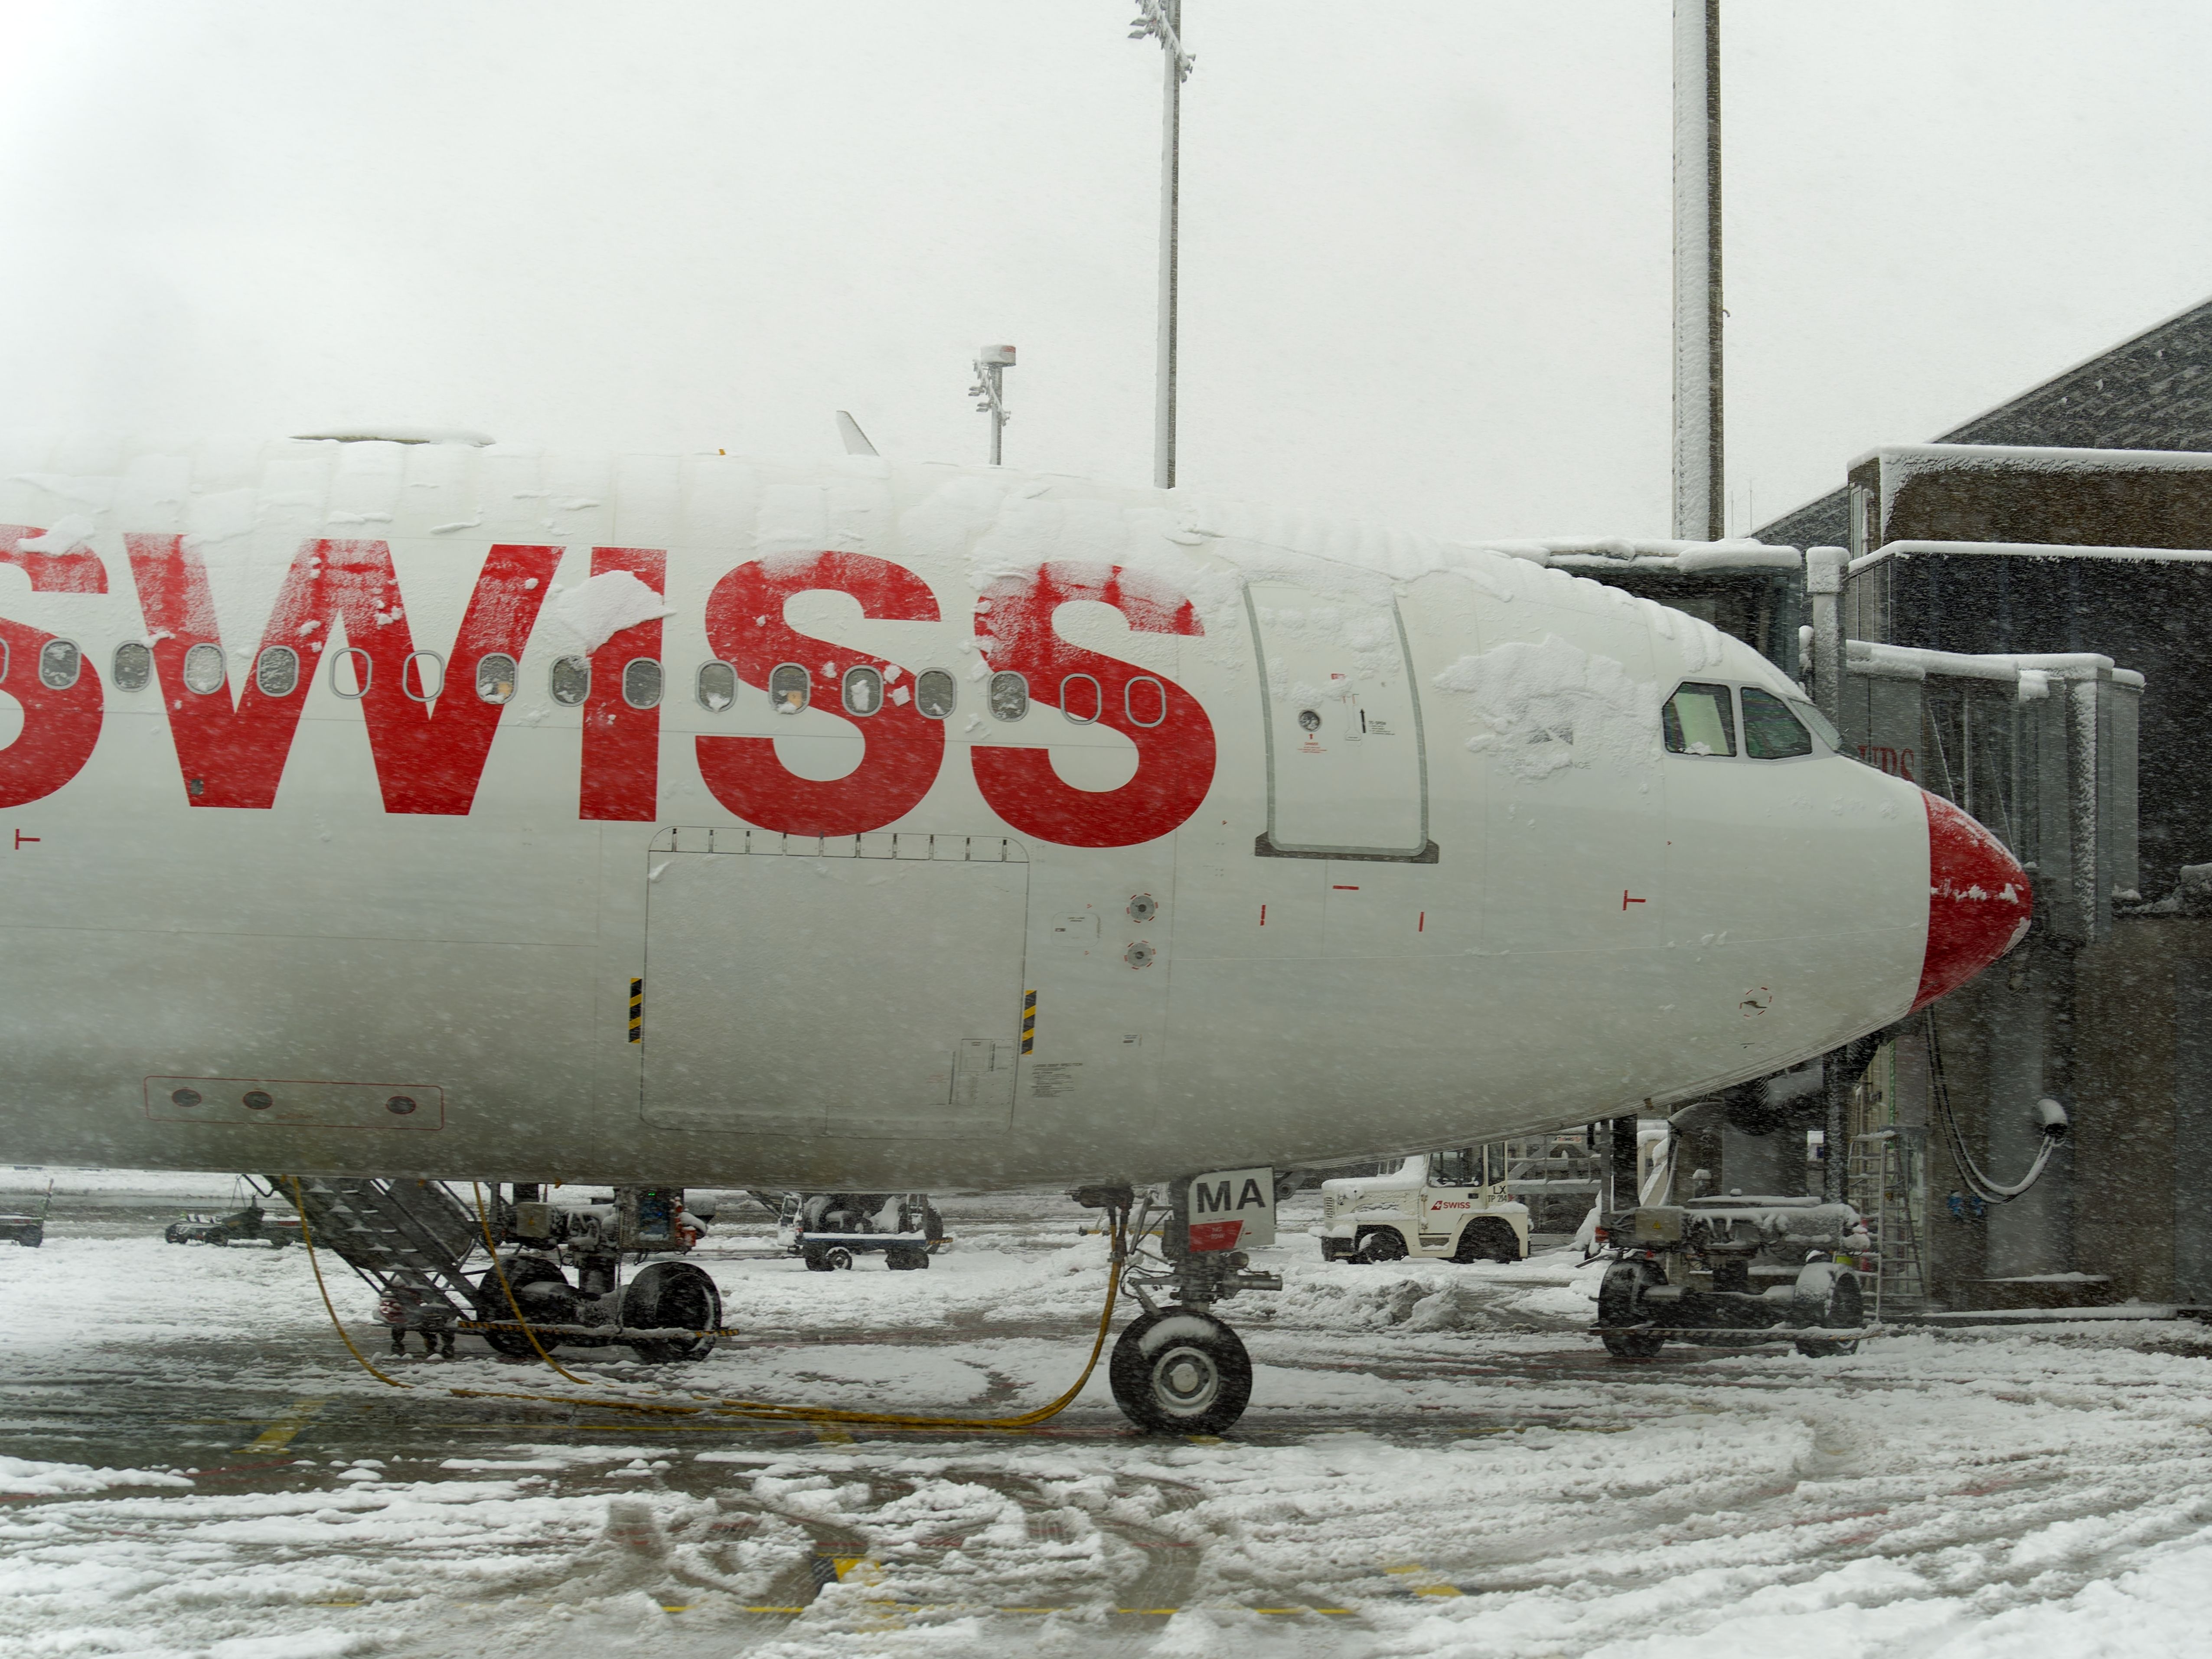 A Swiss Airbus A340-300 parked on a snowy airport apron.